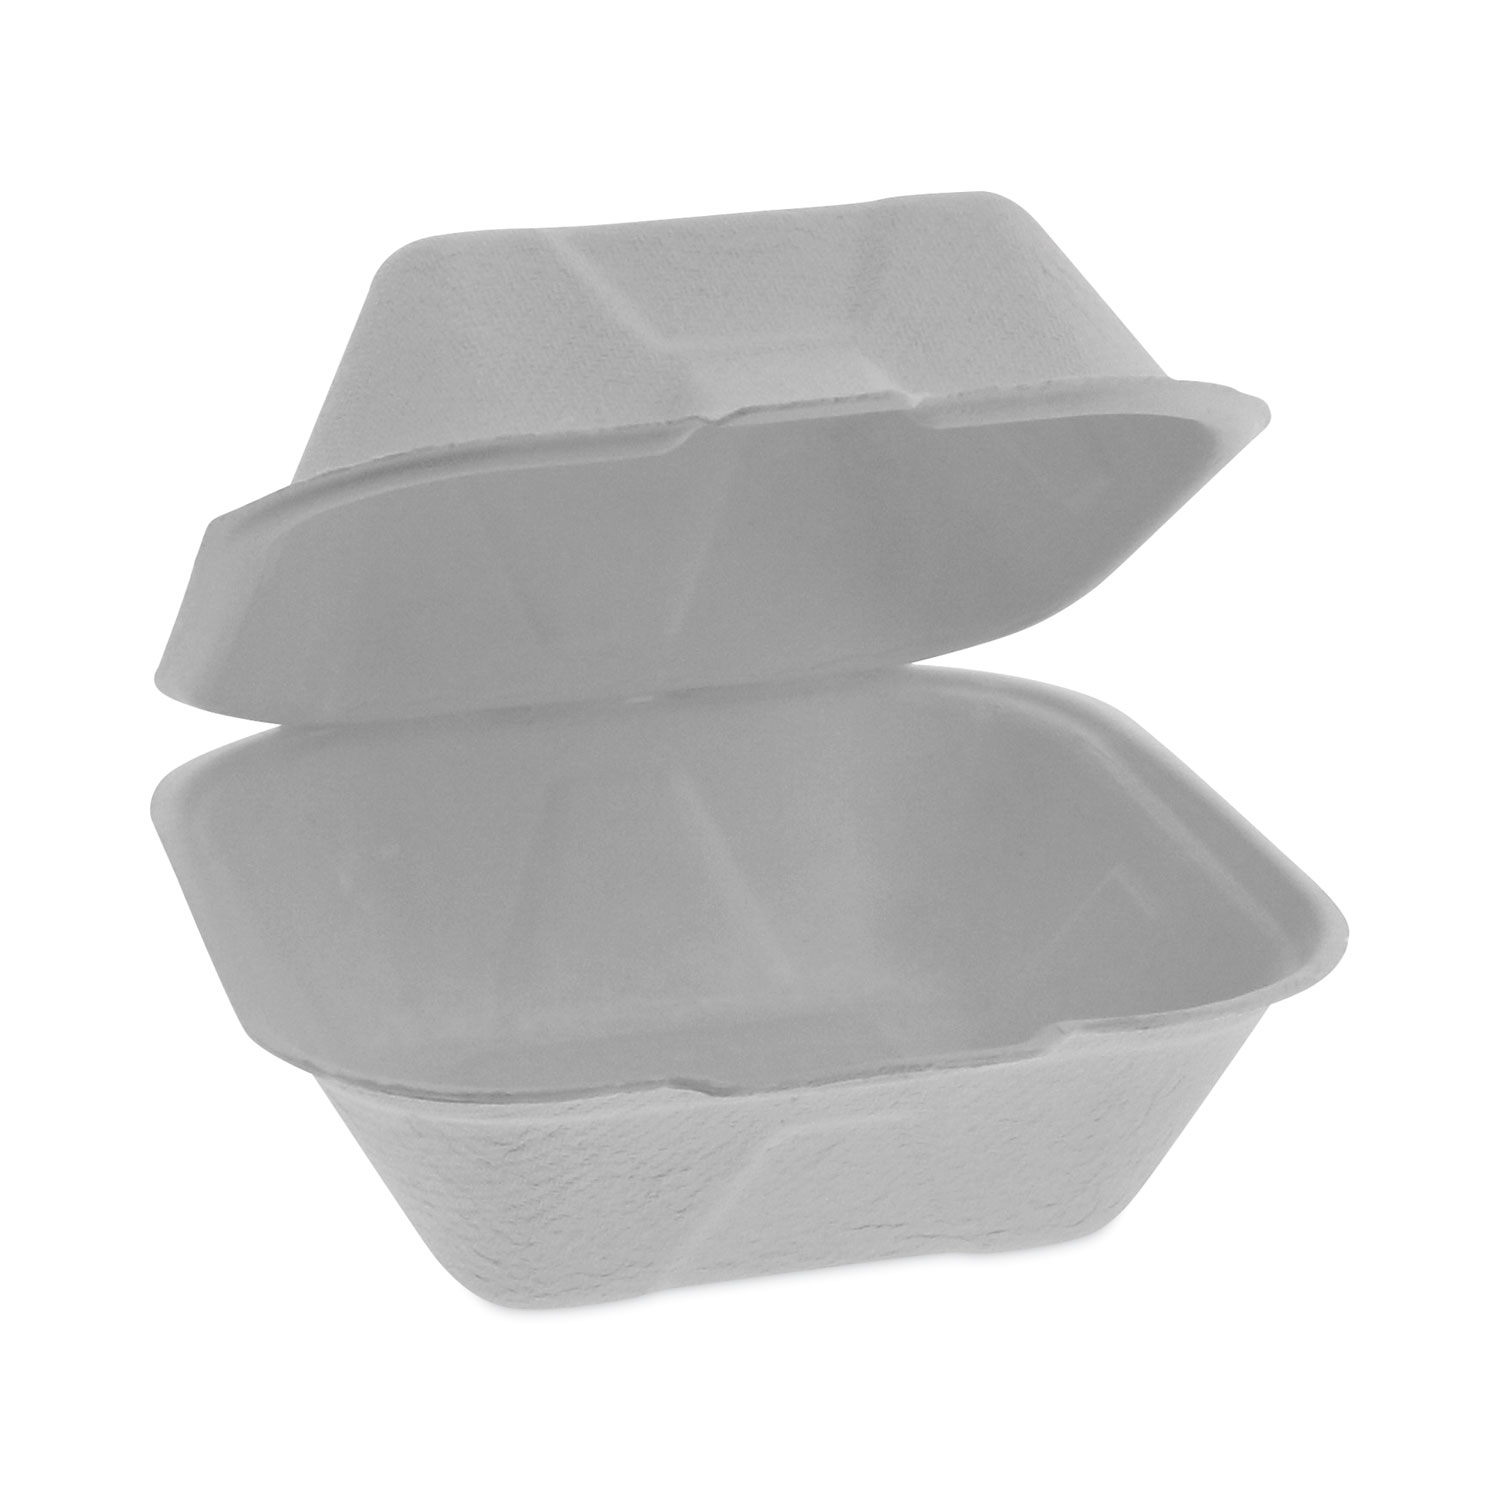 Lock Box Single Compartment Meal Prep Container - 10 ct pkg